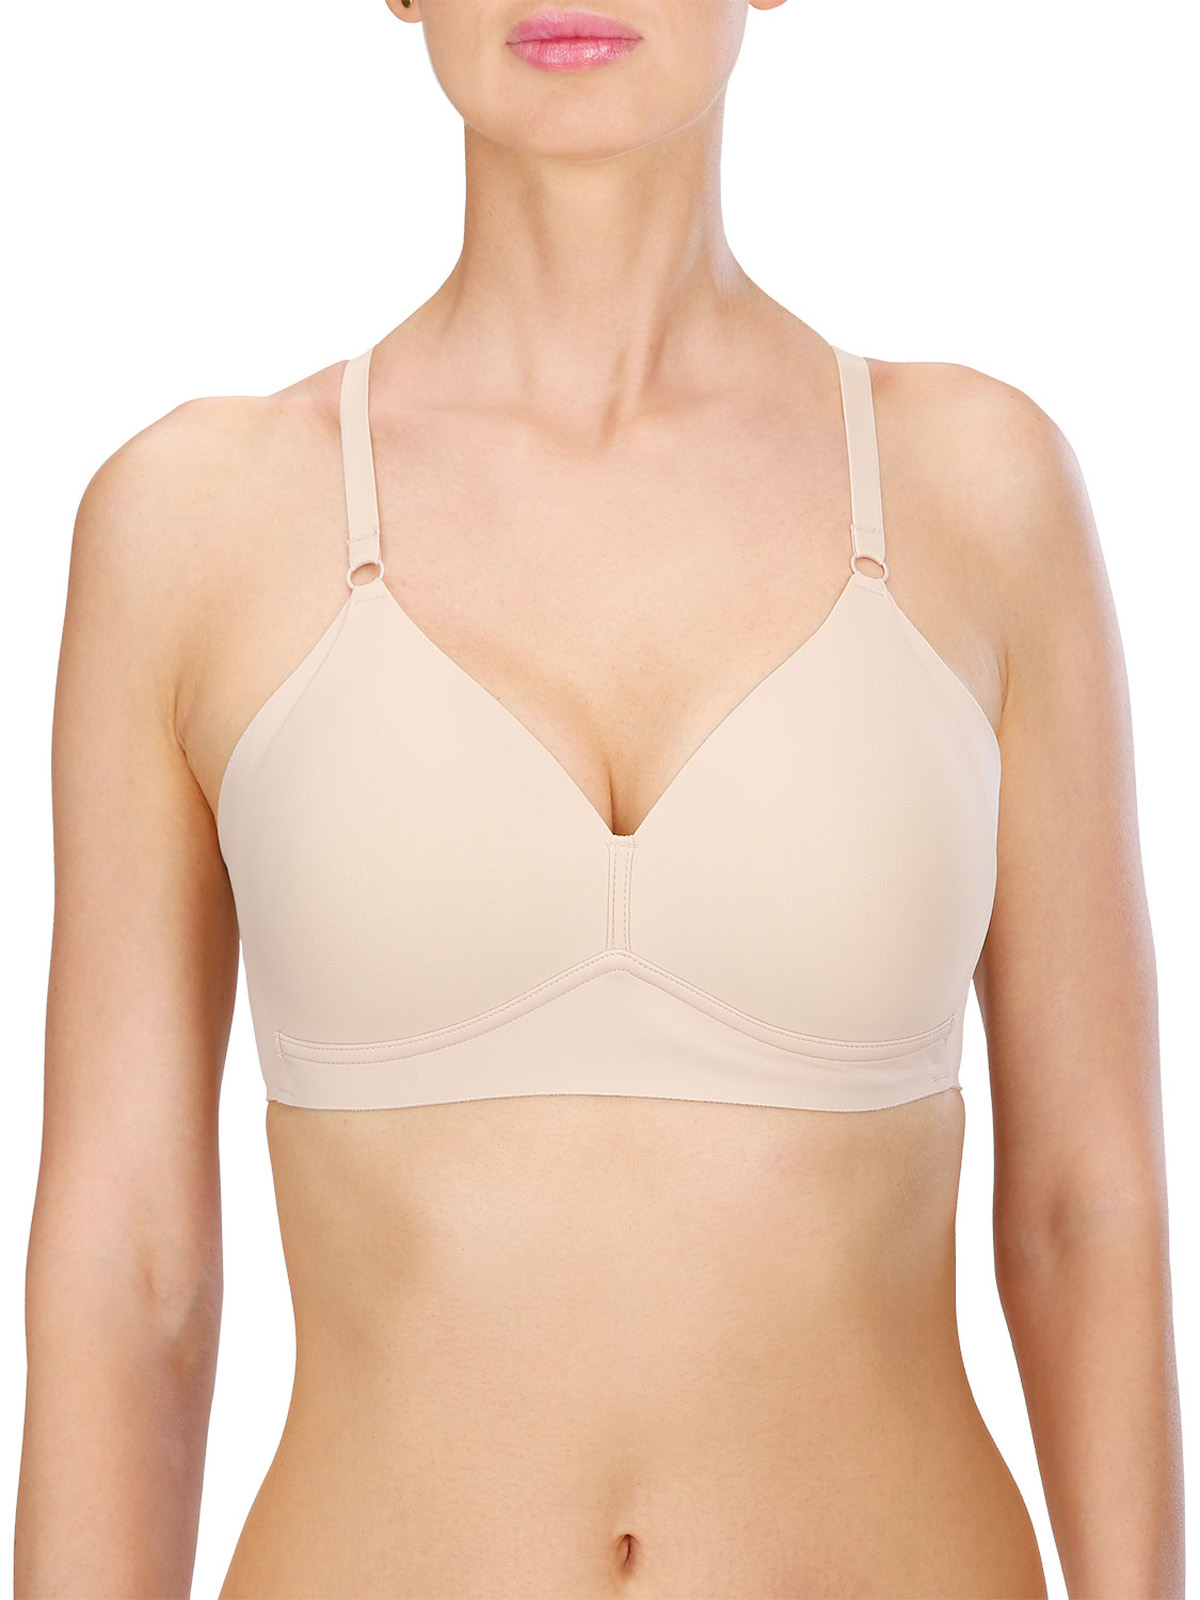 Naturana - - Naturana ASSORTED Soft Cup Non-Wired Bras - Size 34 (B cup)